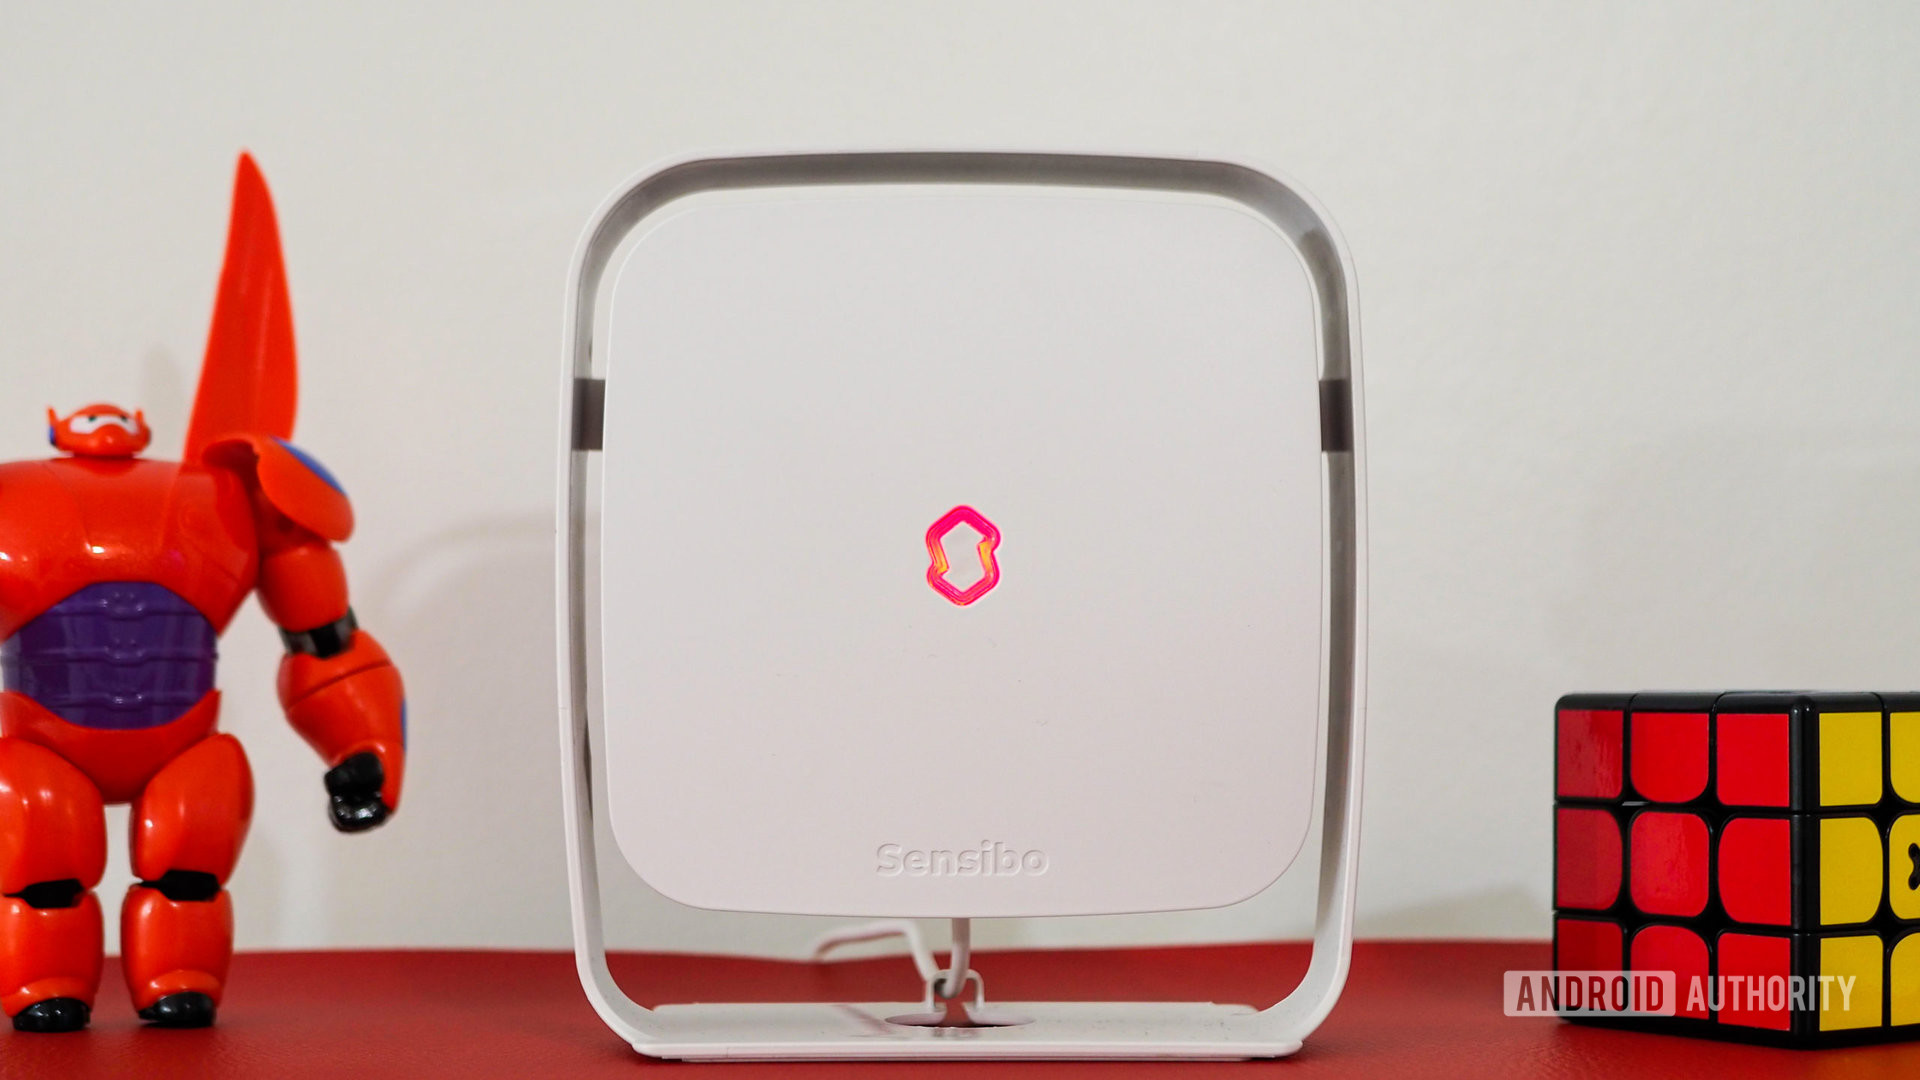 sensibo elements air quality monitor showing red light for bad air quality